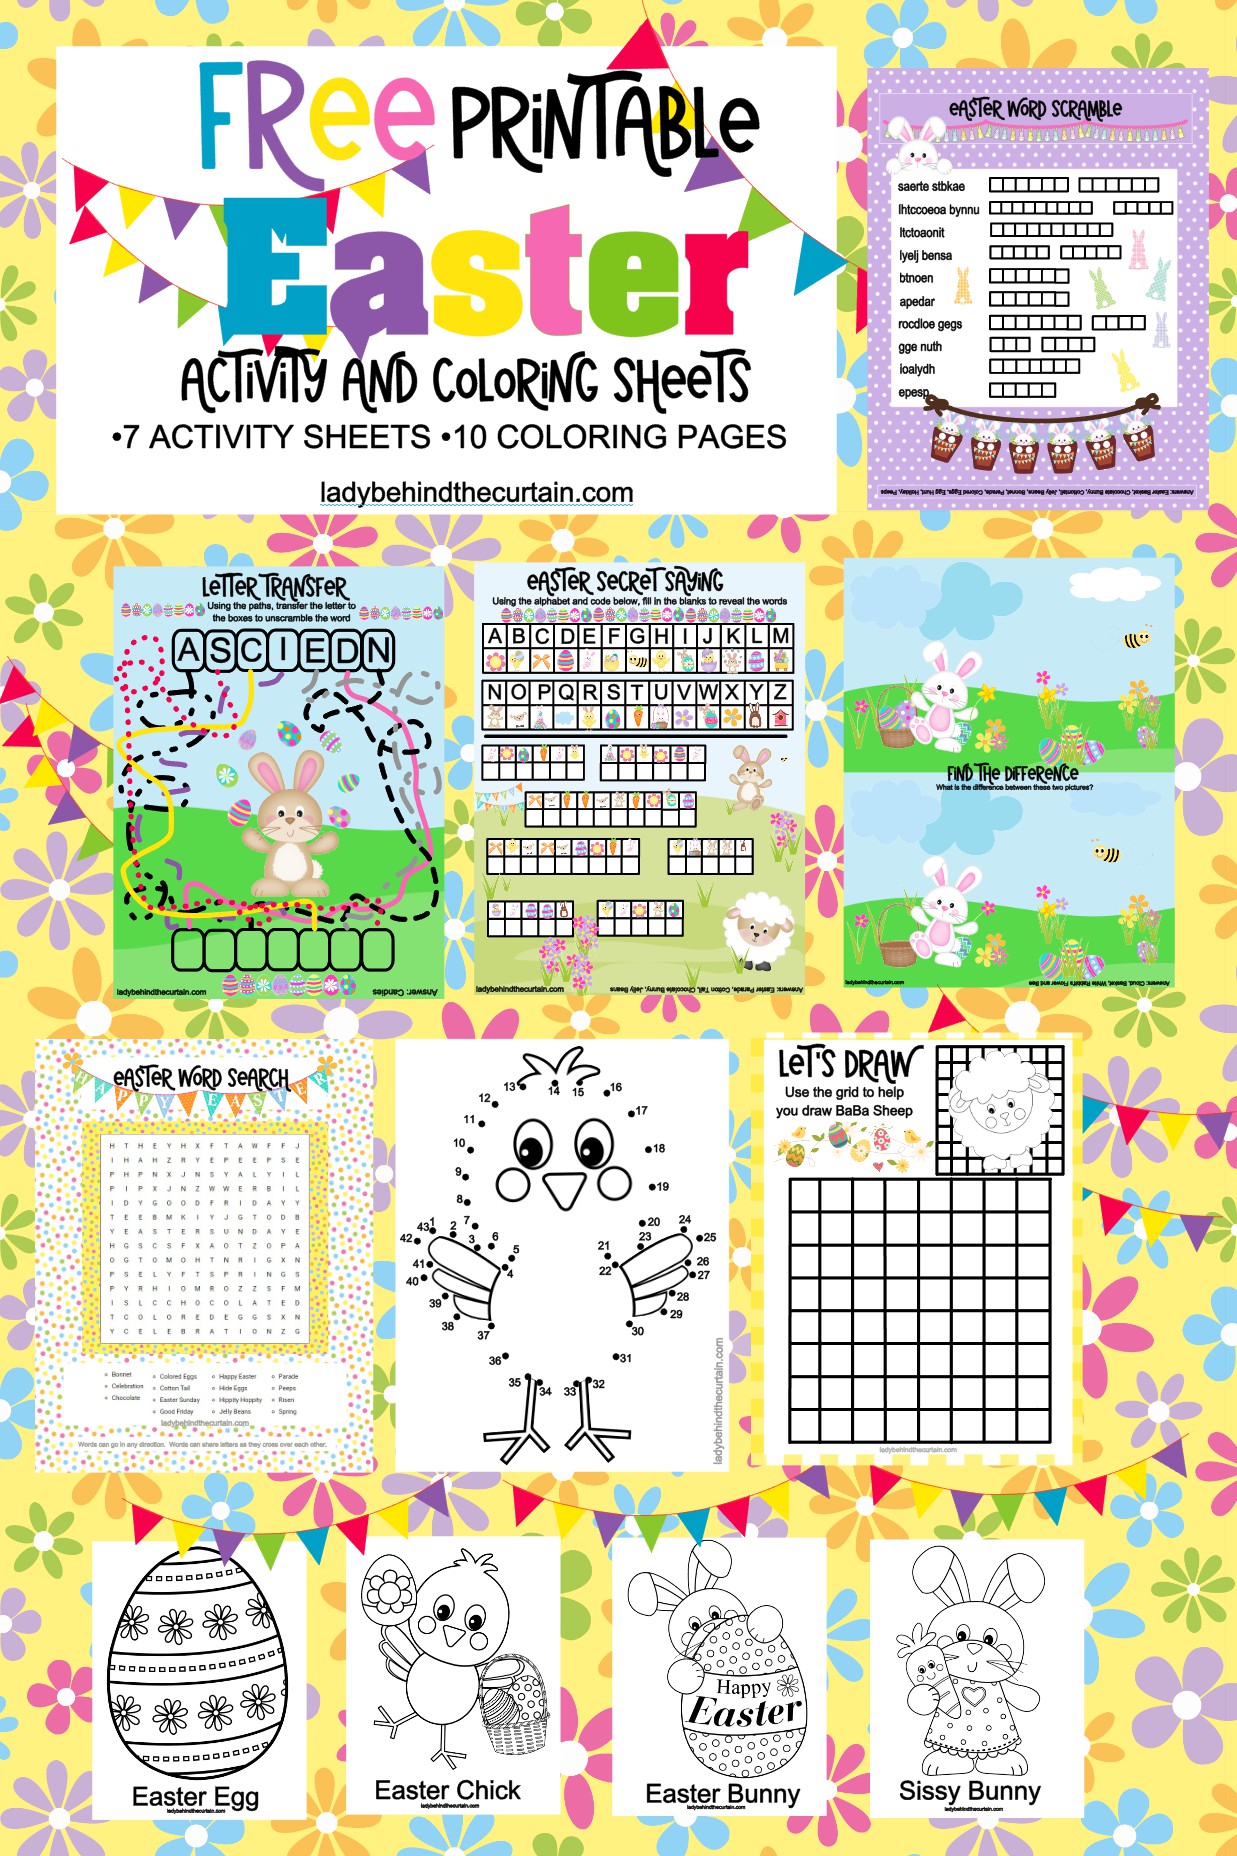 Easter FREE Printable Activity Sheets and Coloring Pages